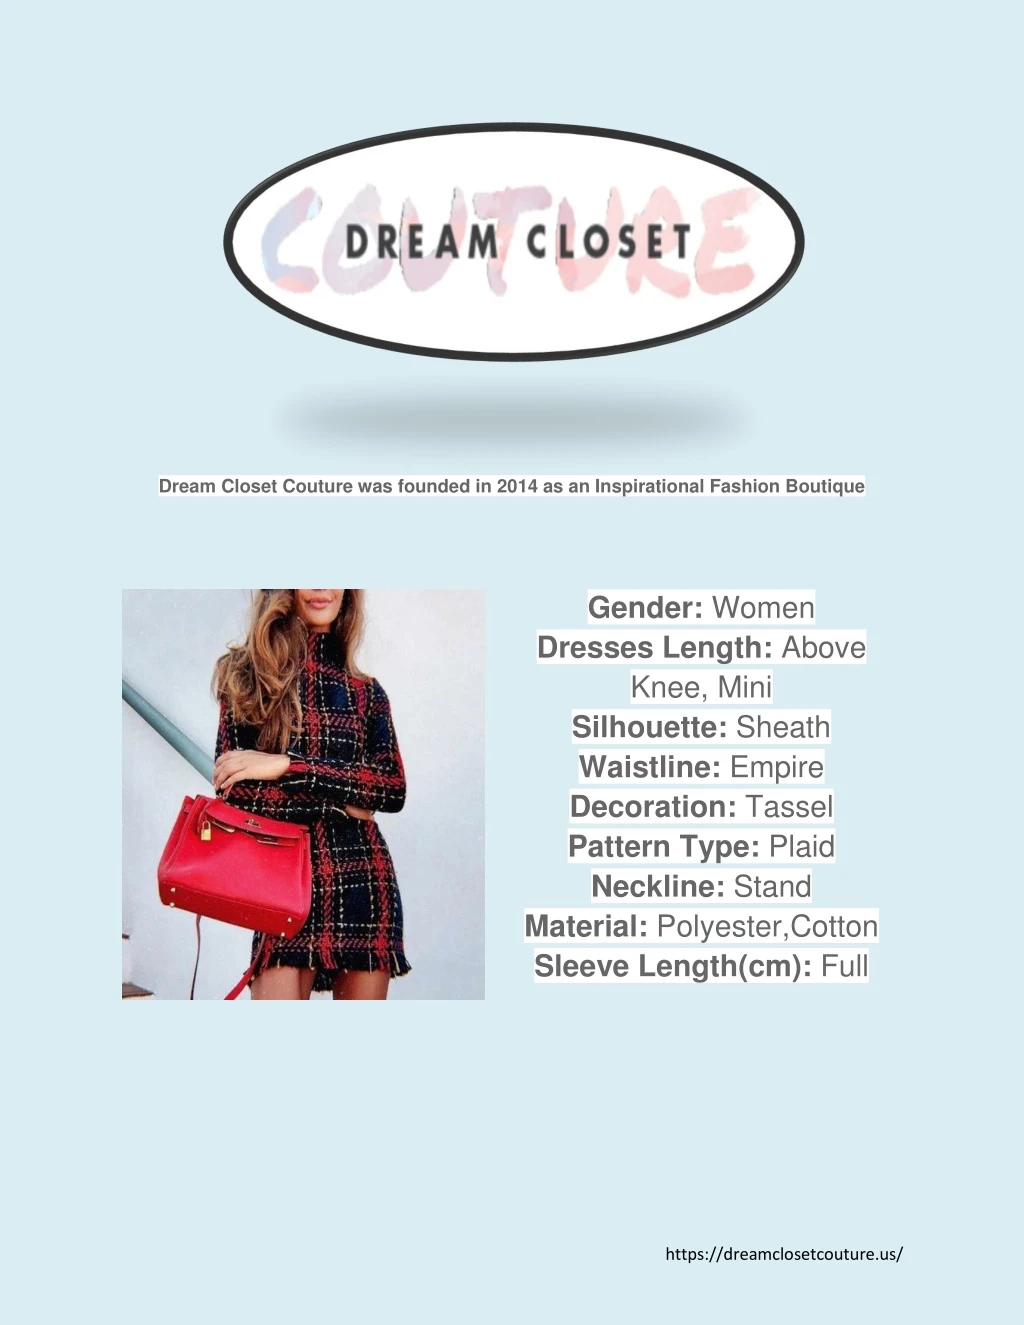 dream closet couture was founded in 2014